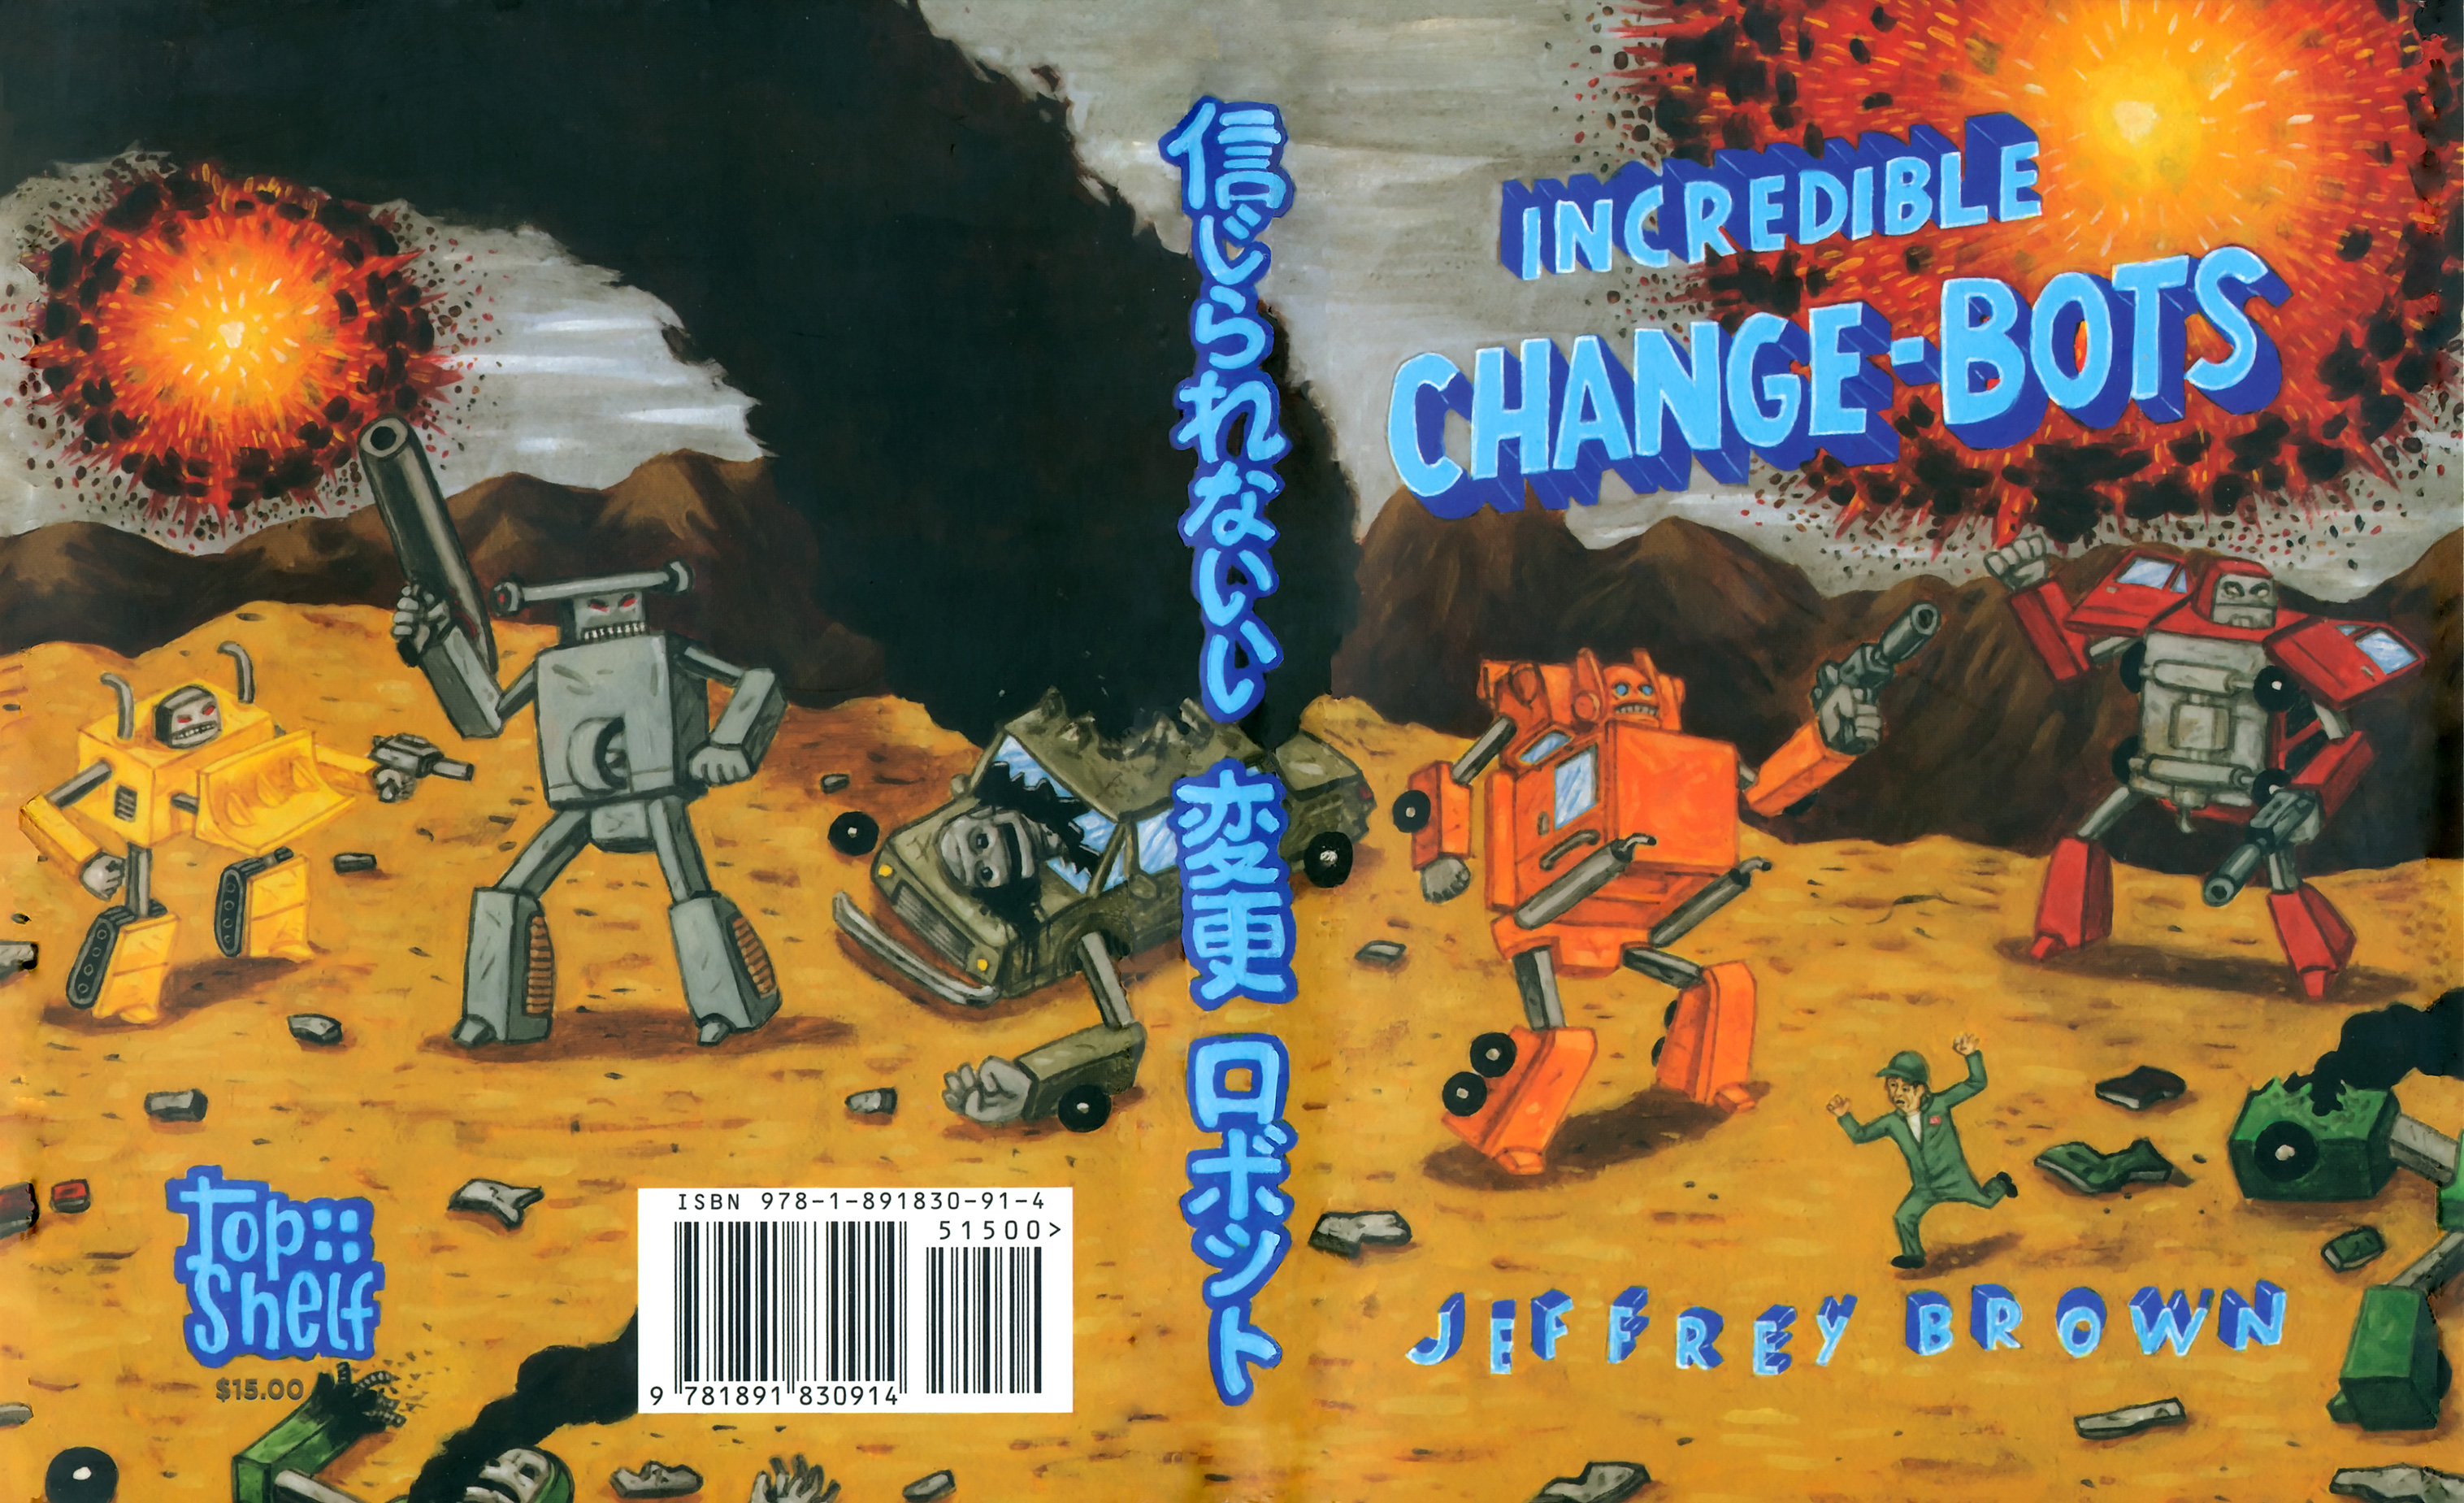 Read online Incredible Change-Bots comic -  Issue # TPB 1 - 1